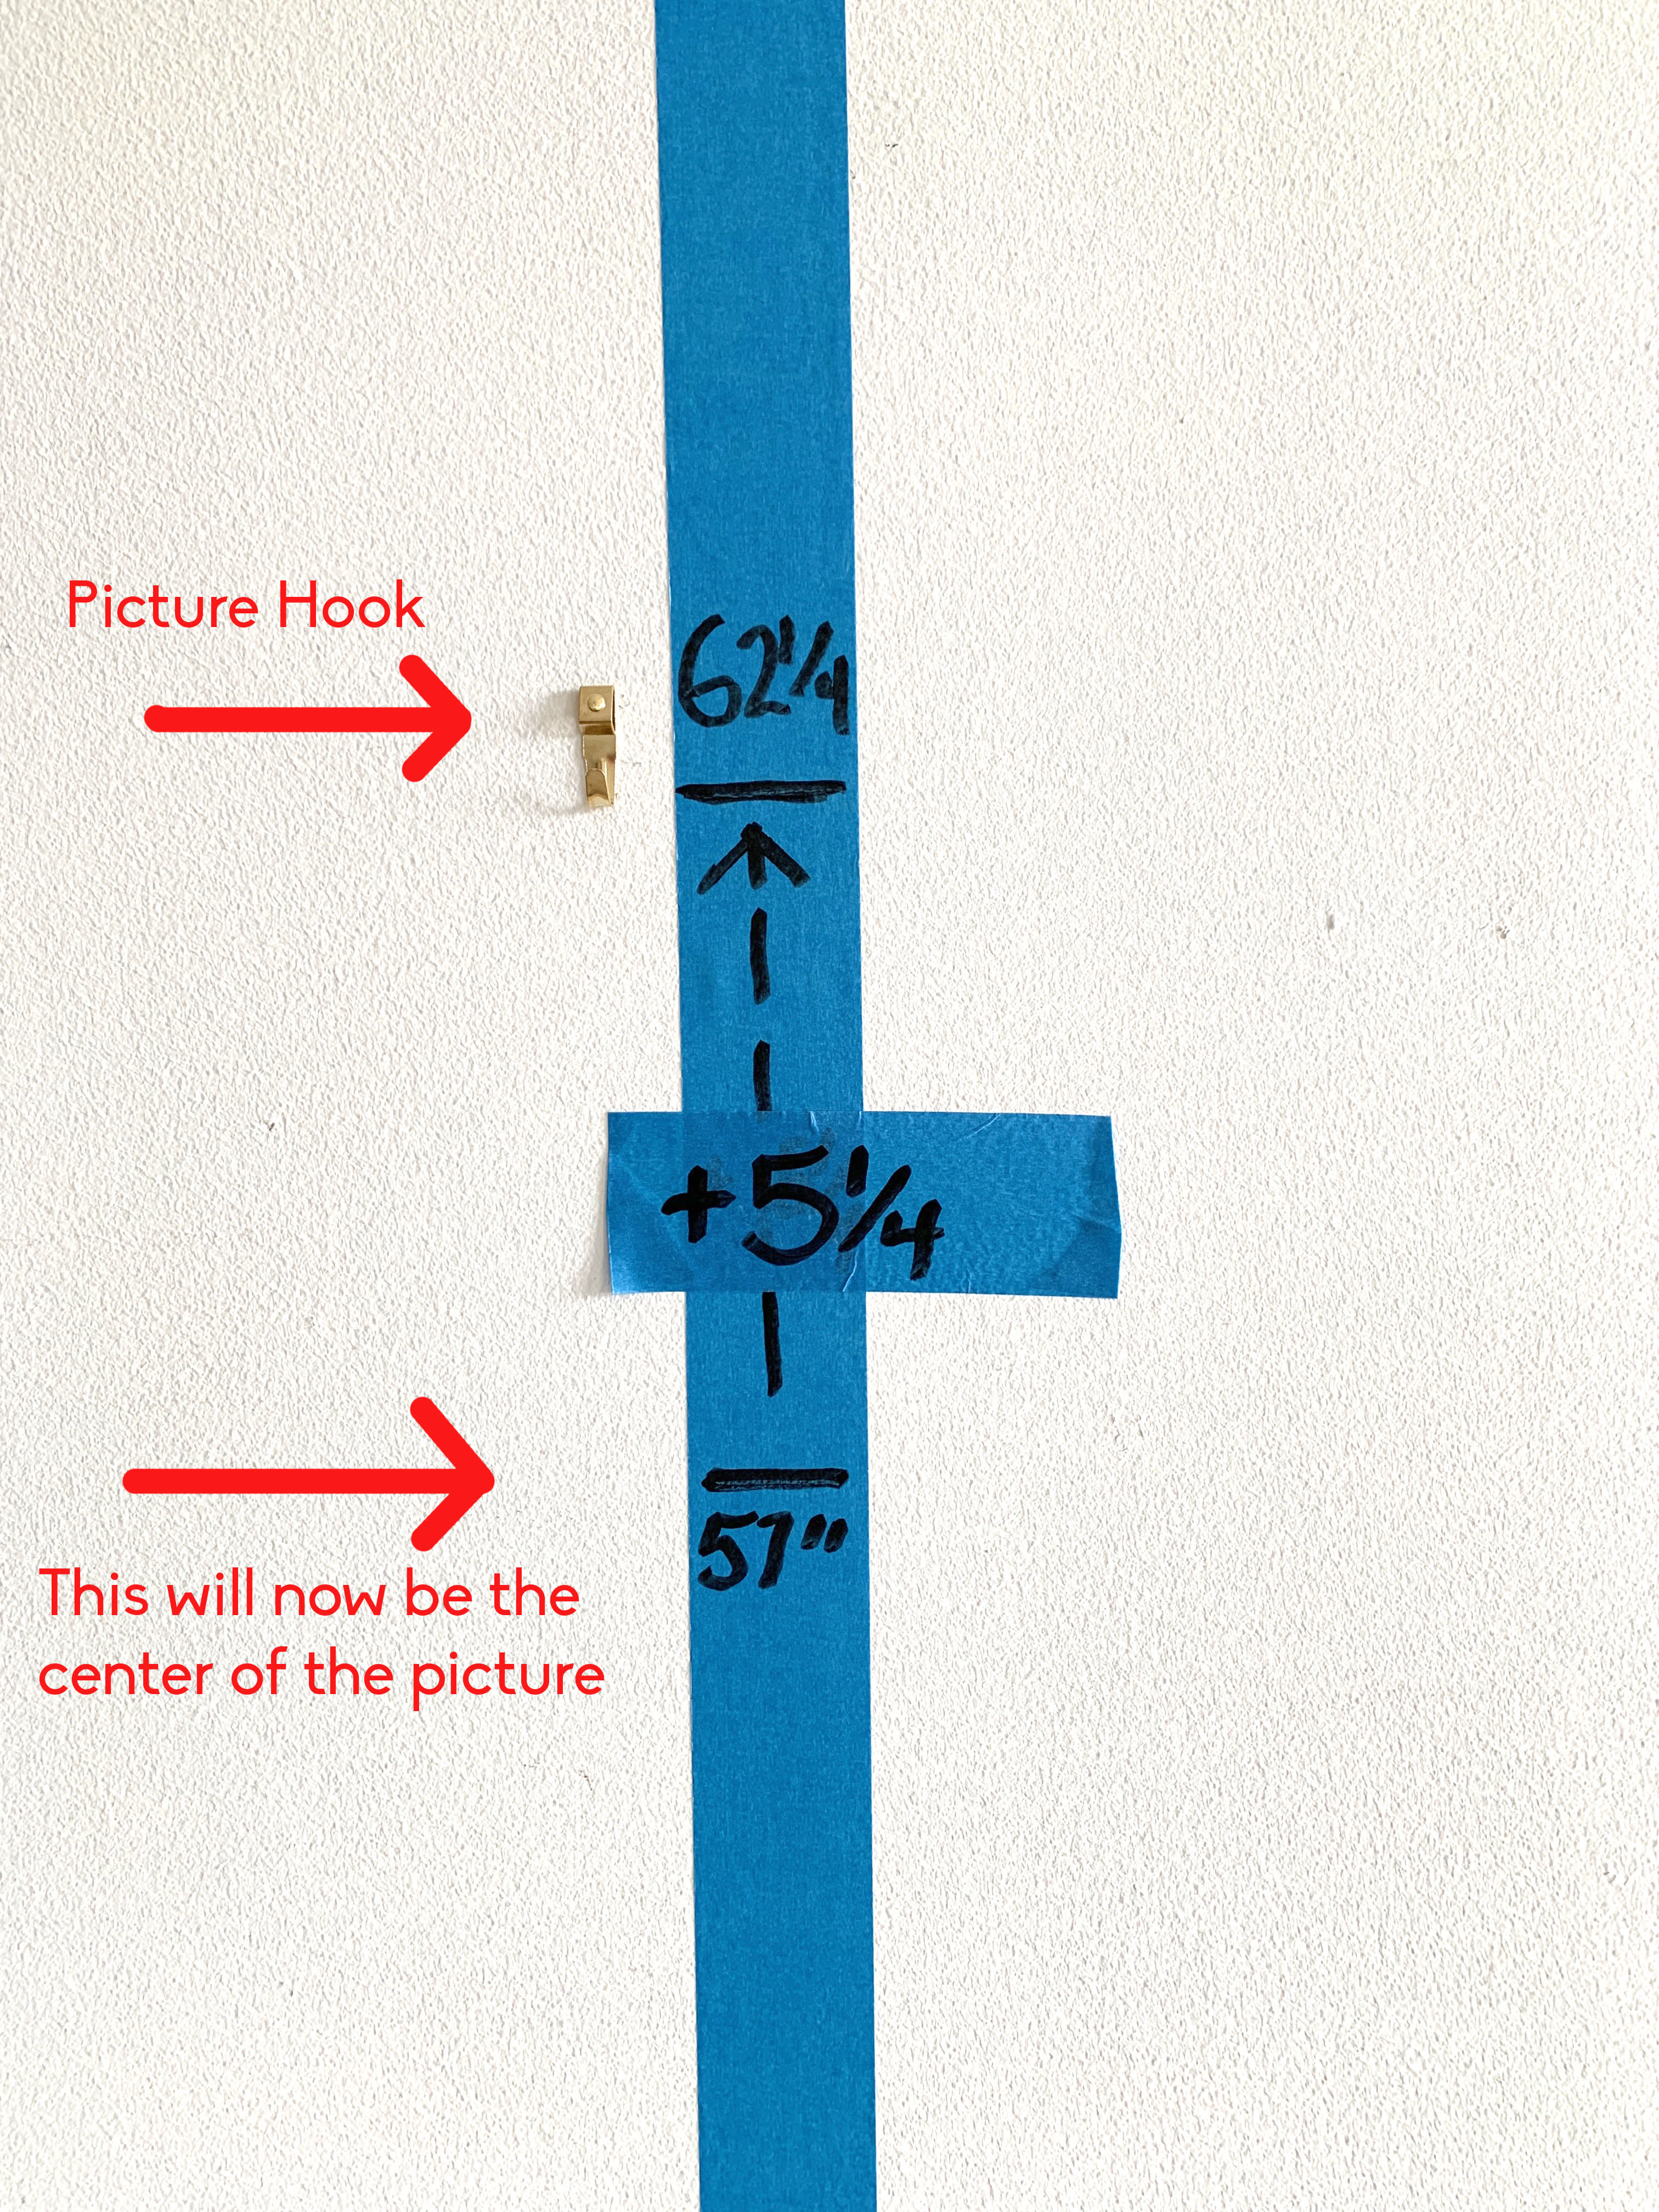 Two Easy Picture Hanging Tips Everyone Should know